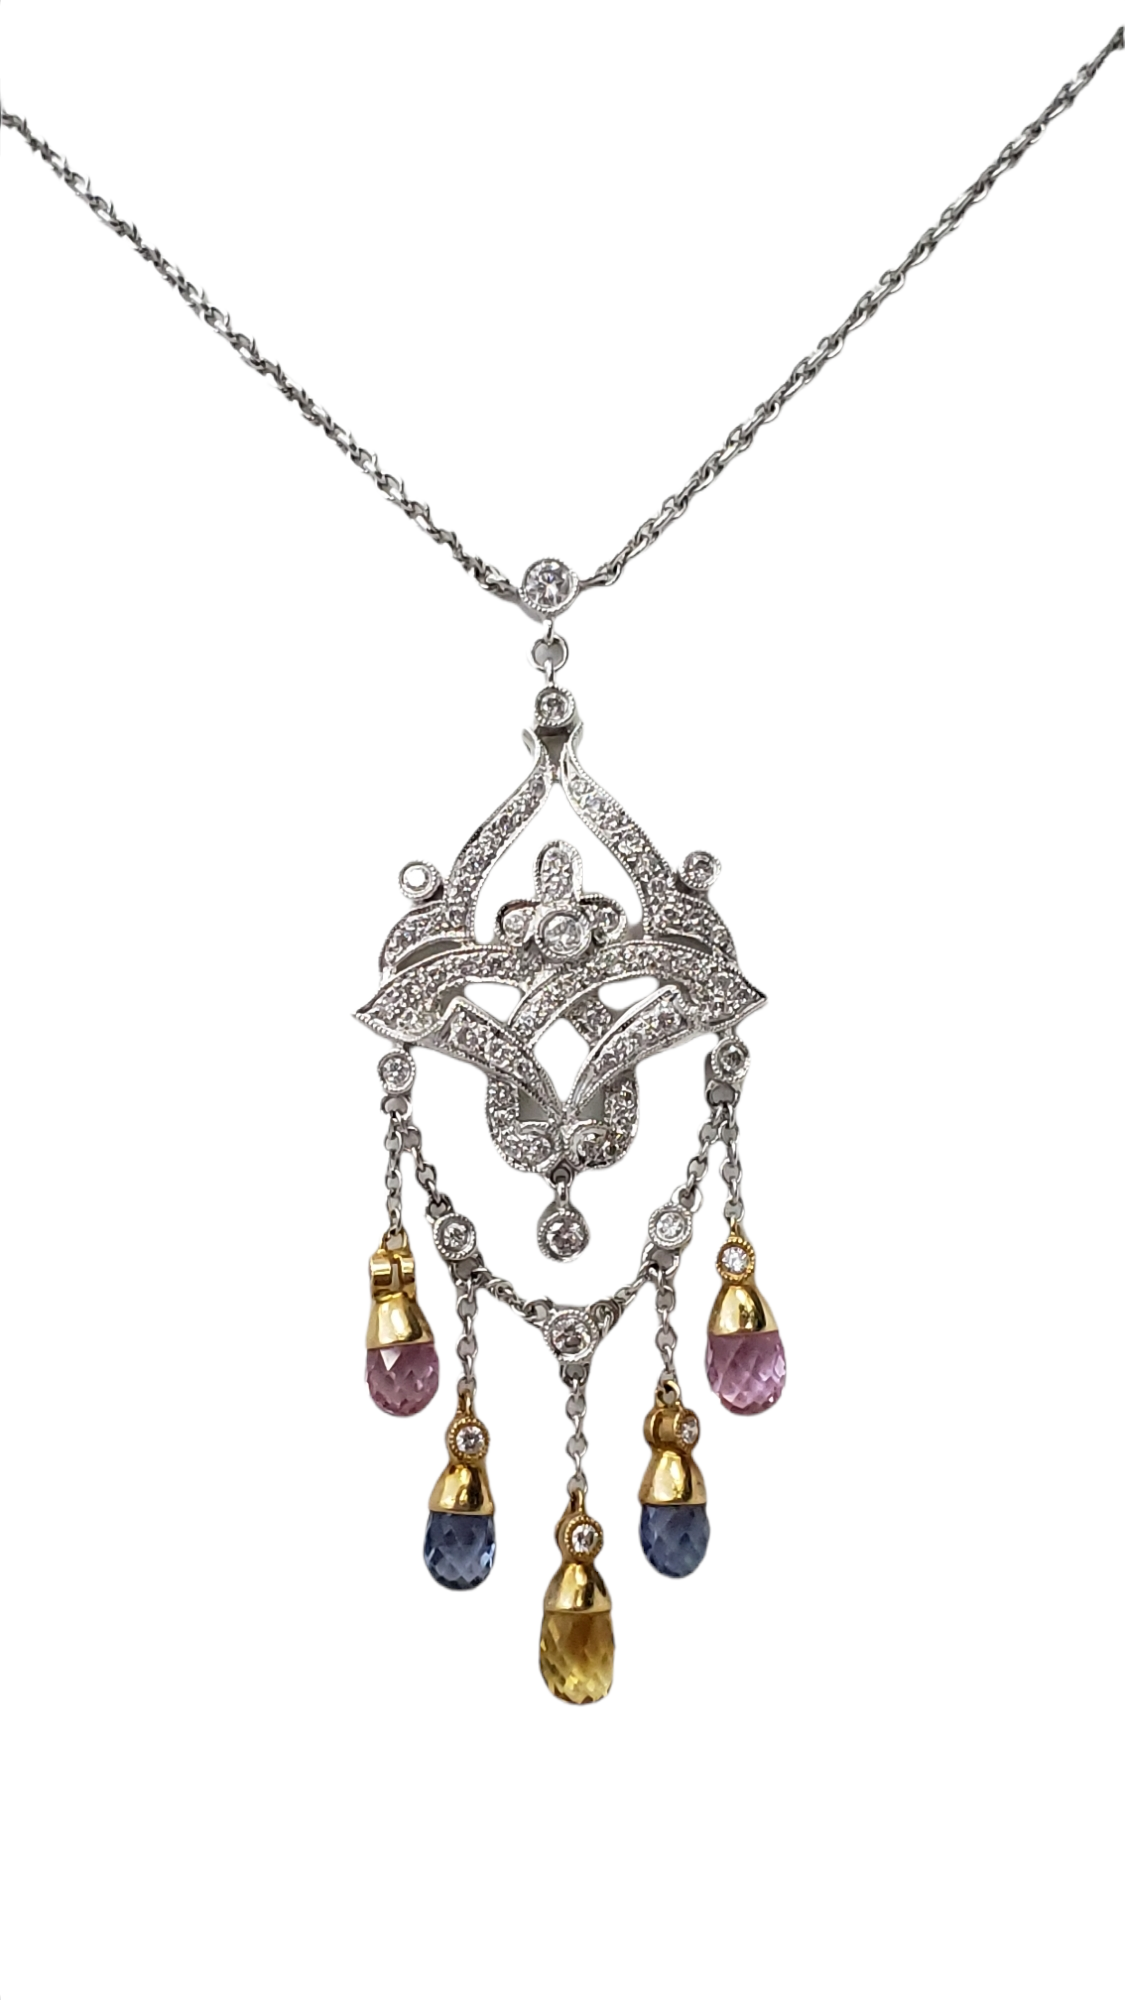 Diamond and Multi-Colored Sapphire Pendant Necklace, 18K White and Yellow Gold